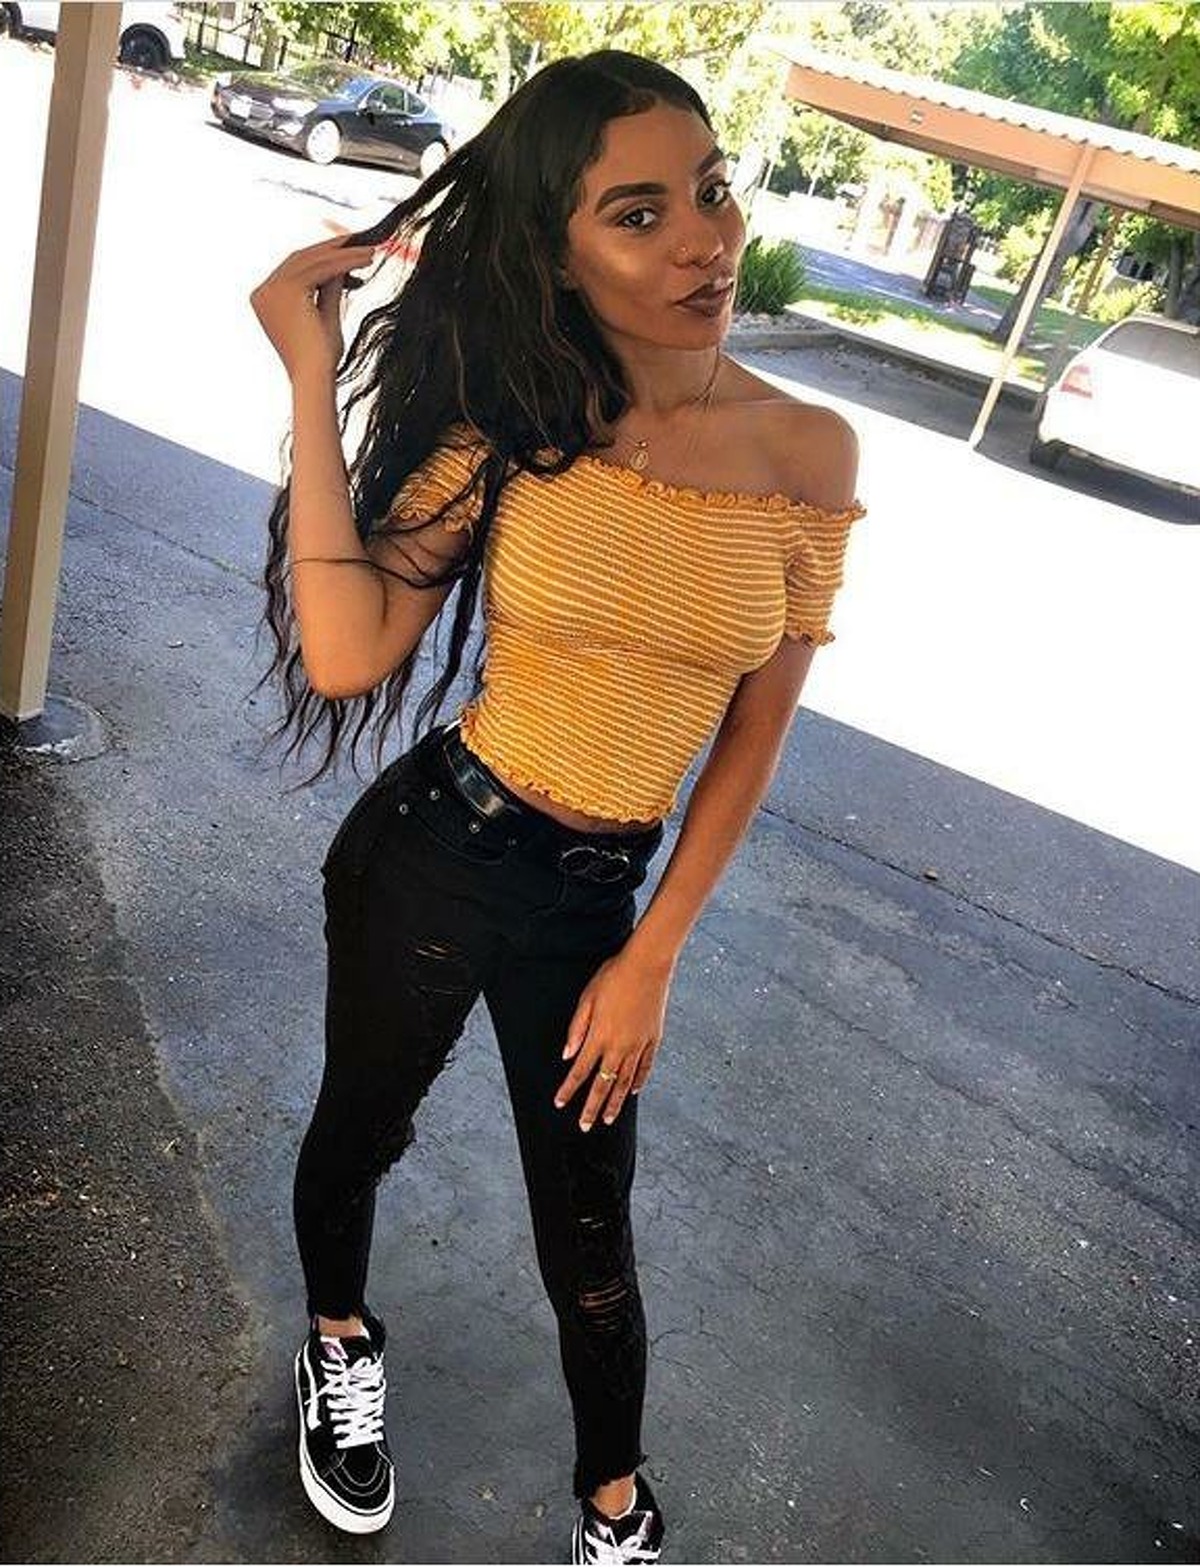 Nia Wilson, 18, was the victim of a fatal stabbing Sunday night at the MacArthur BART station in Oakland, family members told The Chronicle.